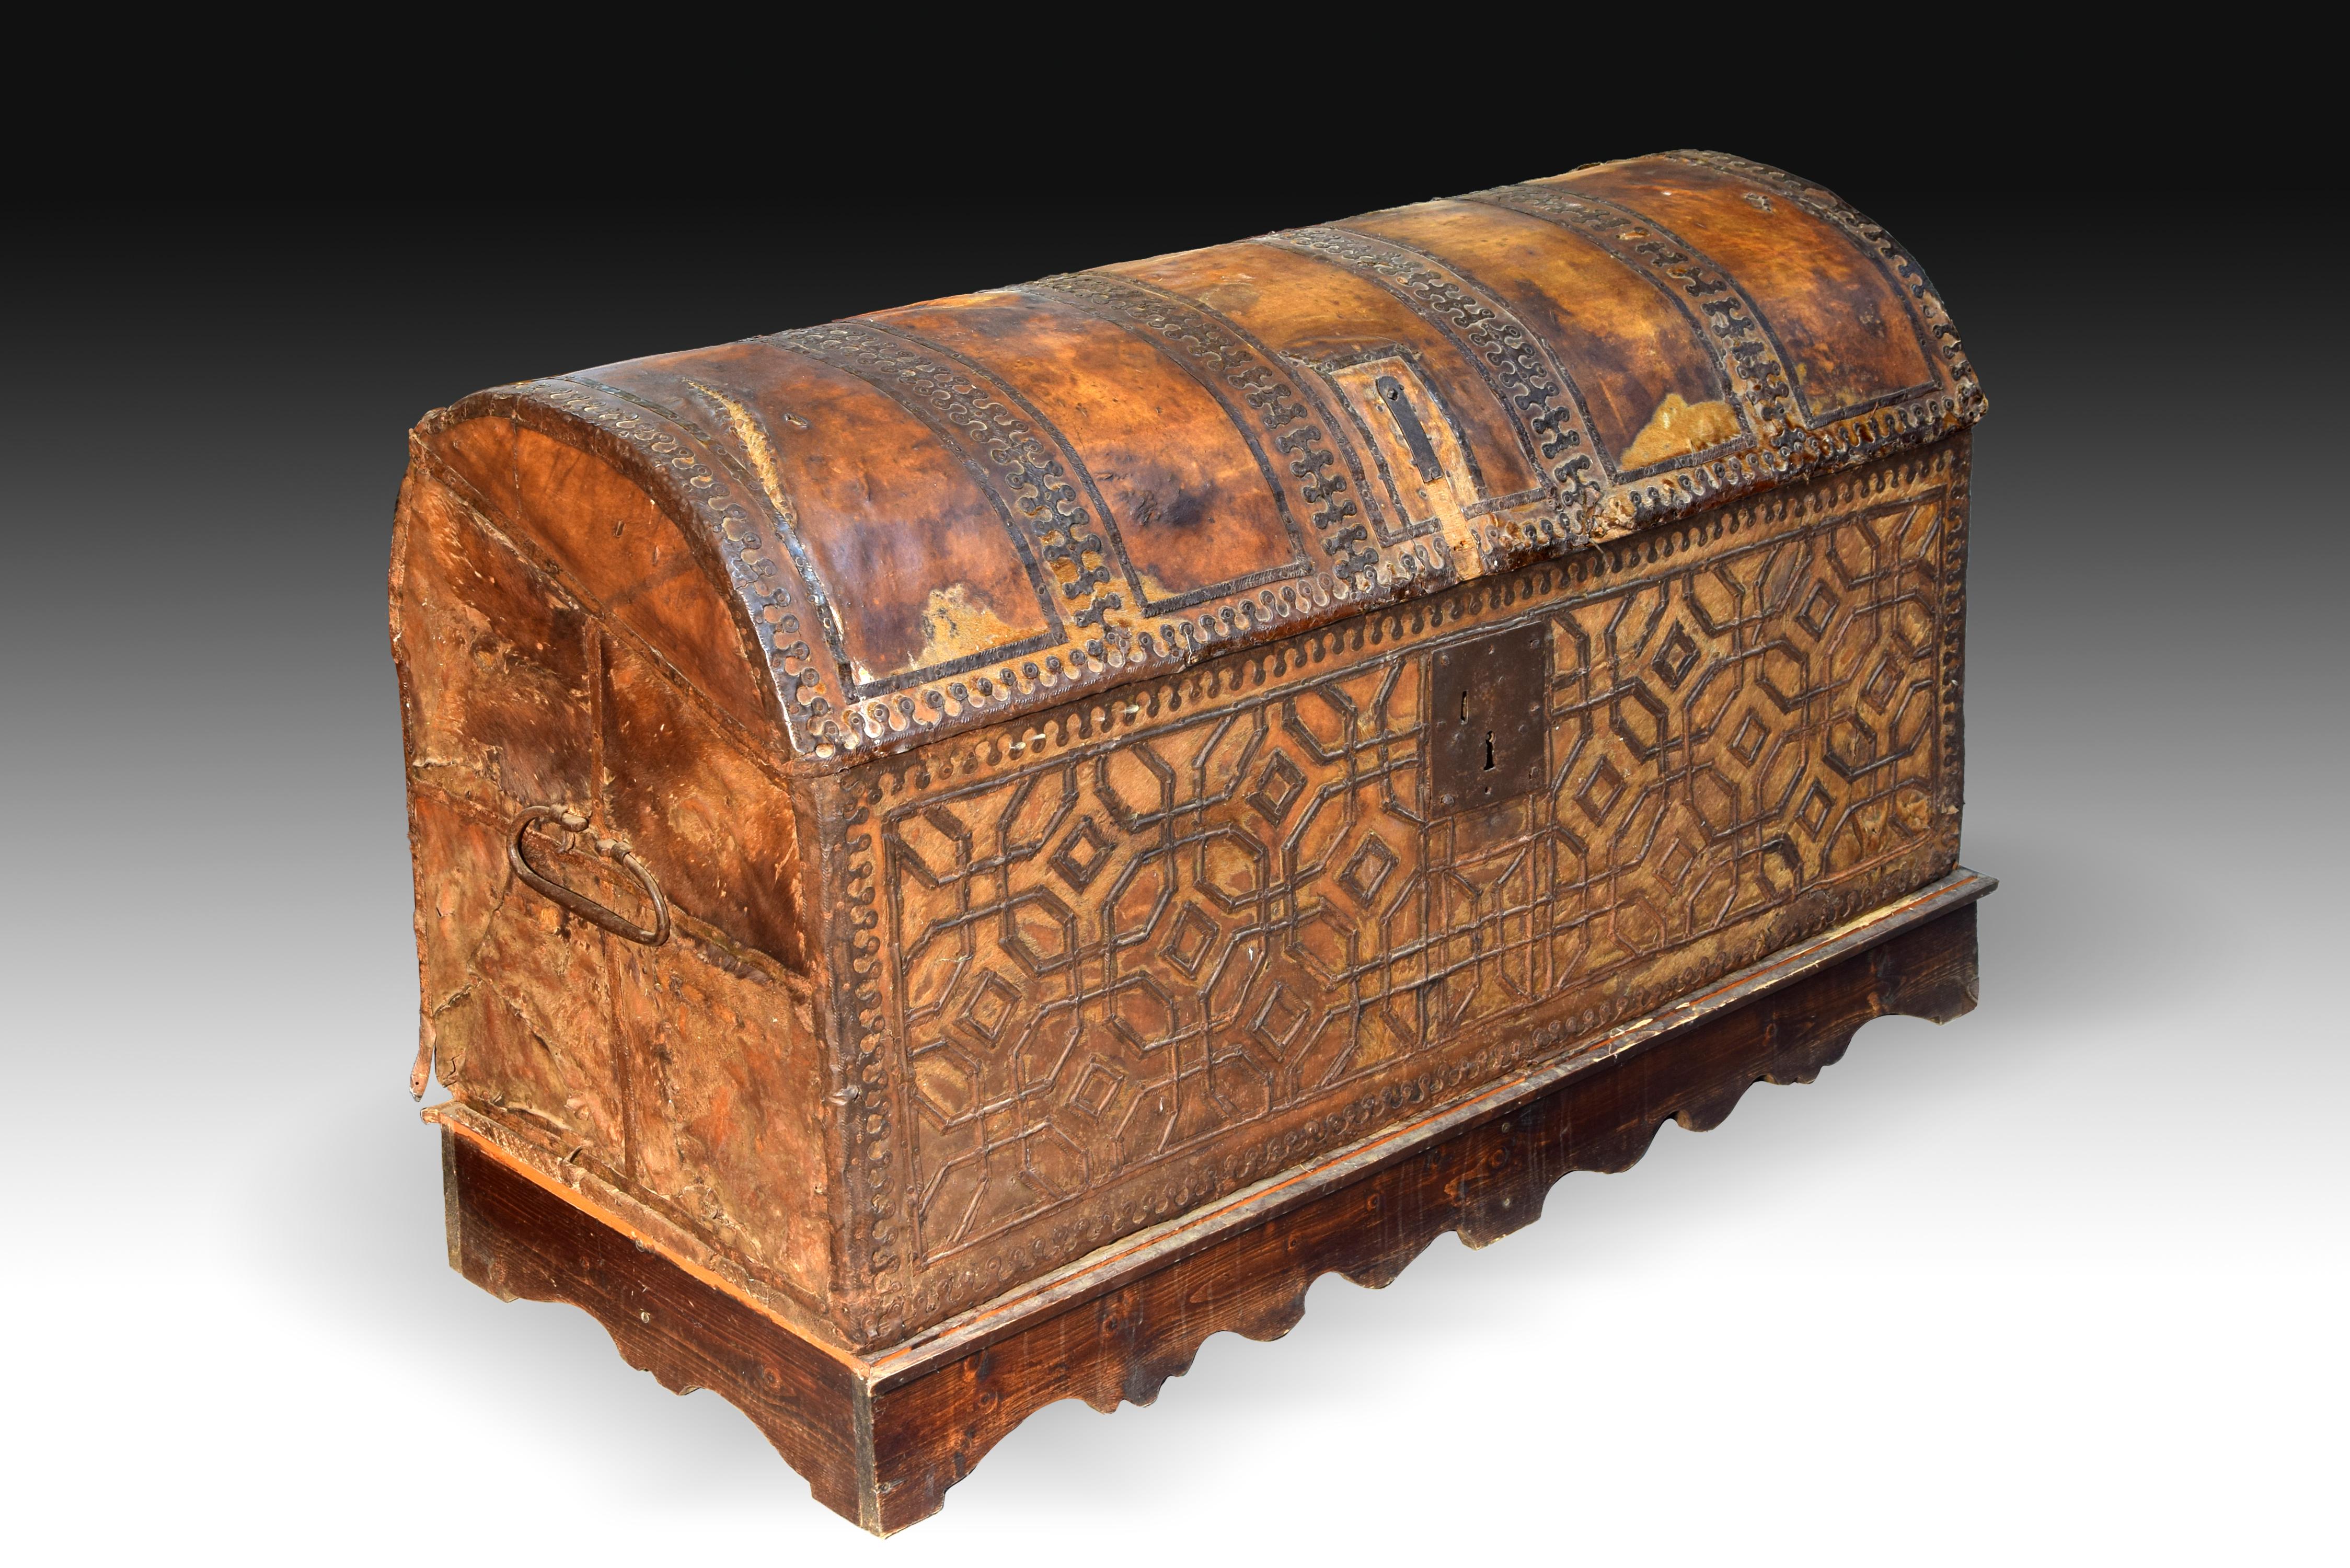 Ark with geometric decoration. Leather and wrought iron, Spain, circa 1500.
Rectangular trunk with curved lid and key lock located on a trimmed molding that rests on three supports on the floor. On the outside, it is decorated with sticks and